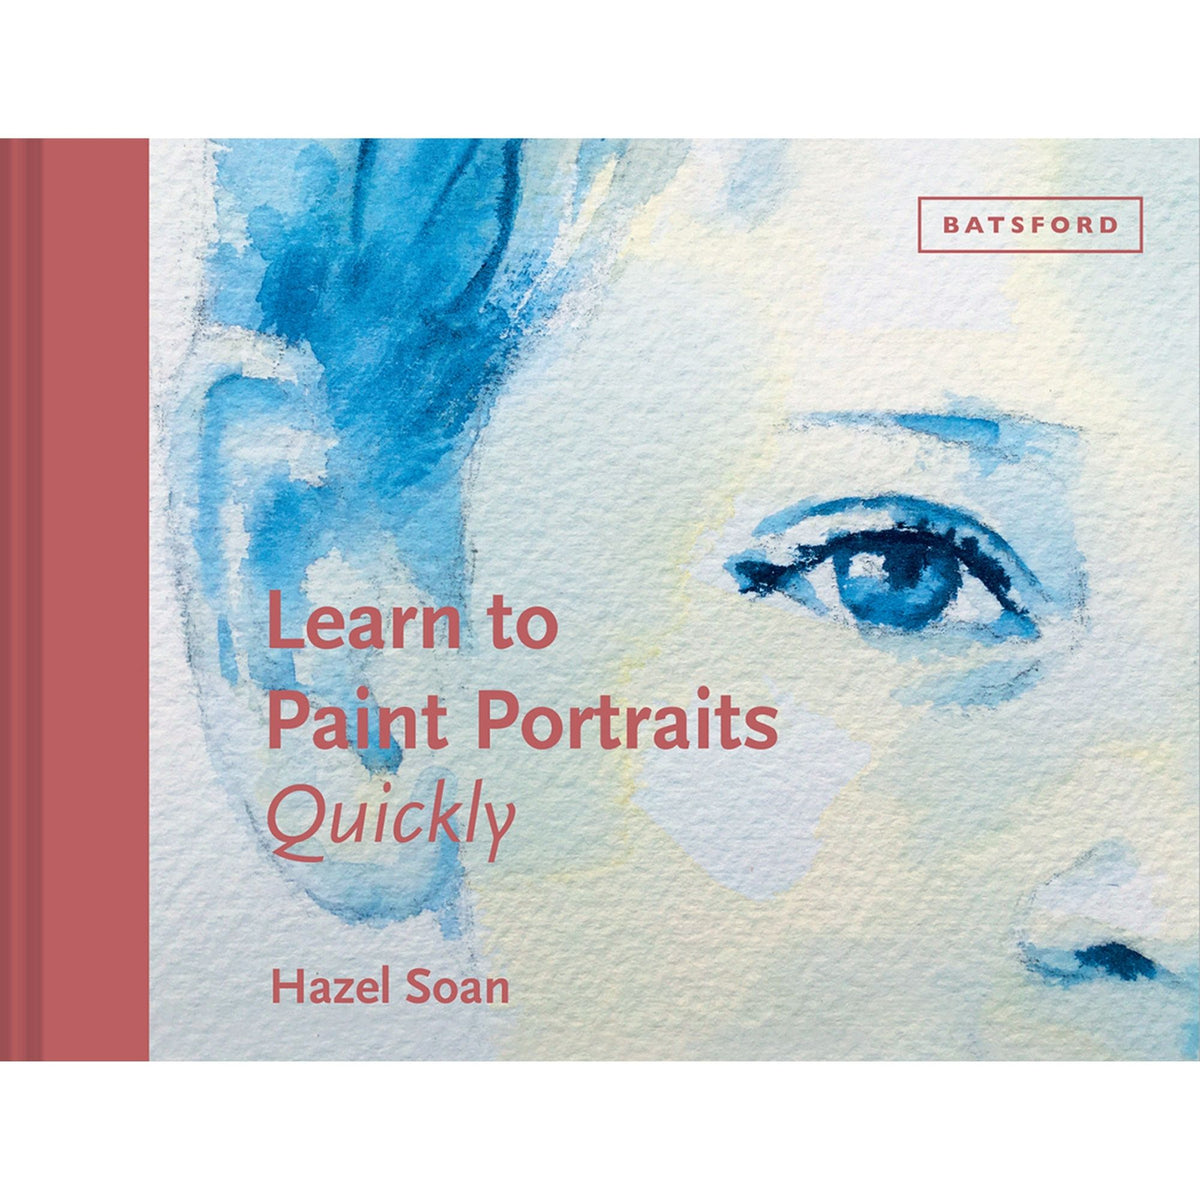 Learn to Paint Portraits Quickly - H. Soan